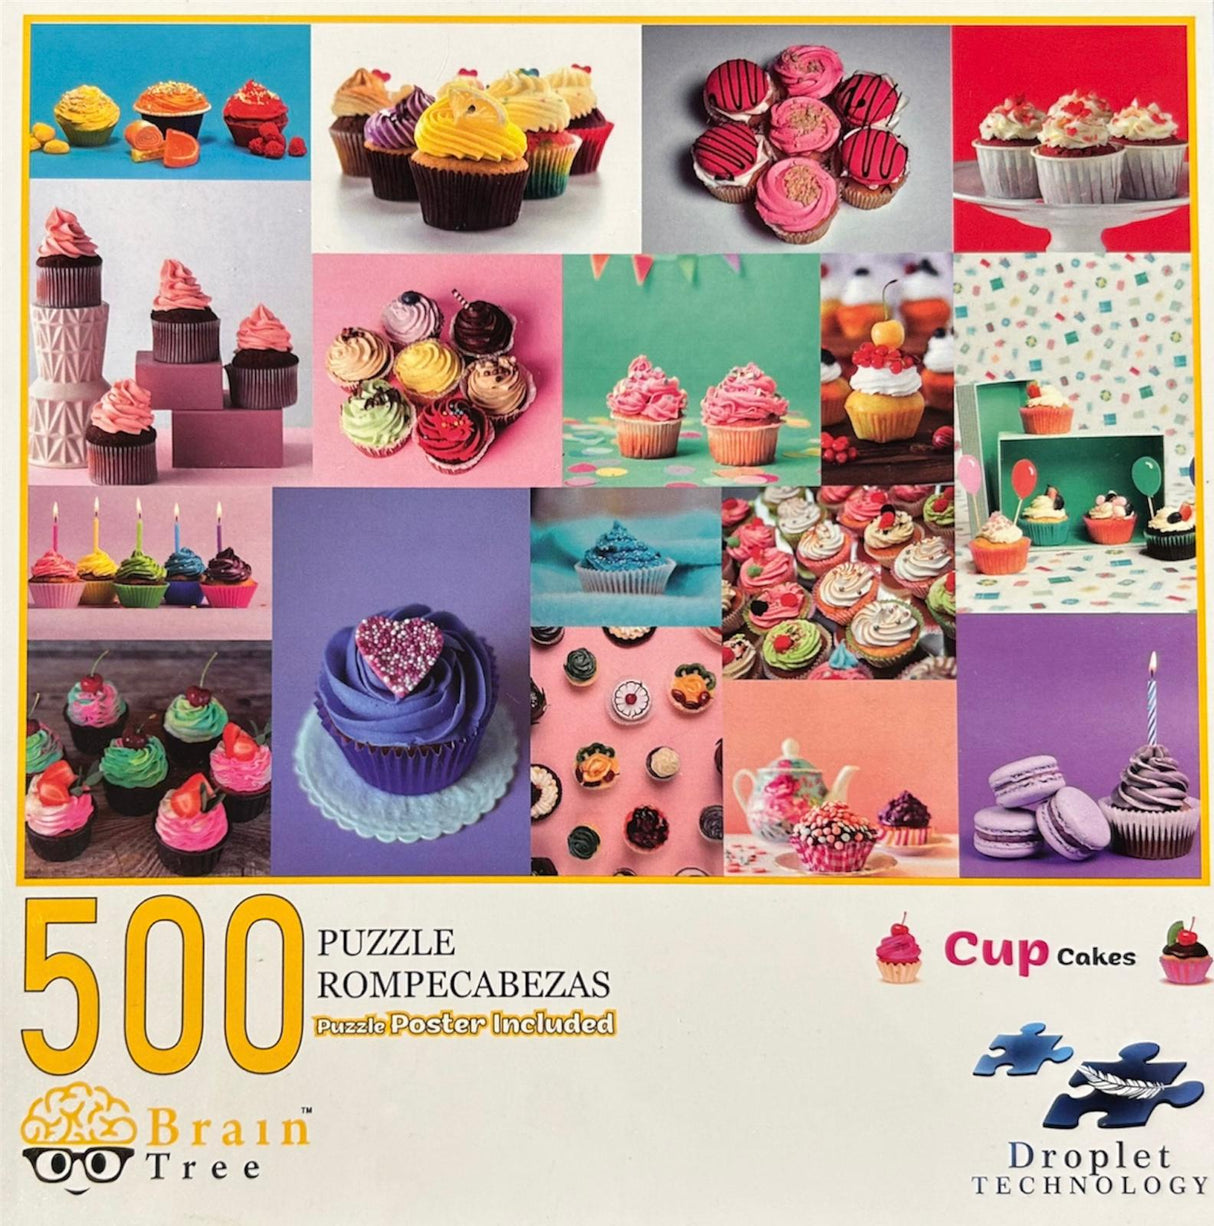 Cup Cakes Puzzle